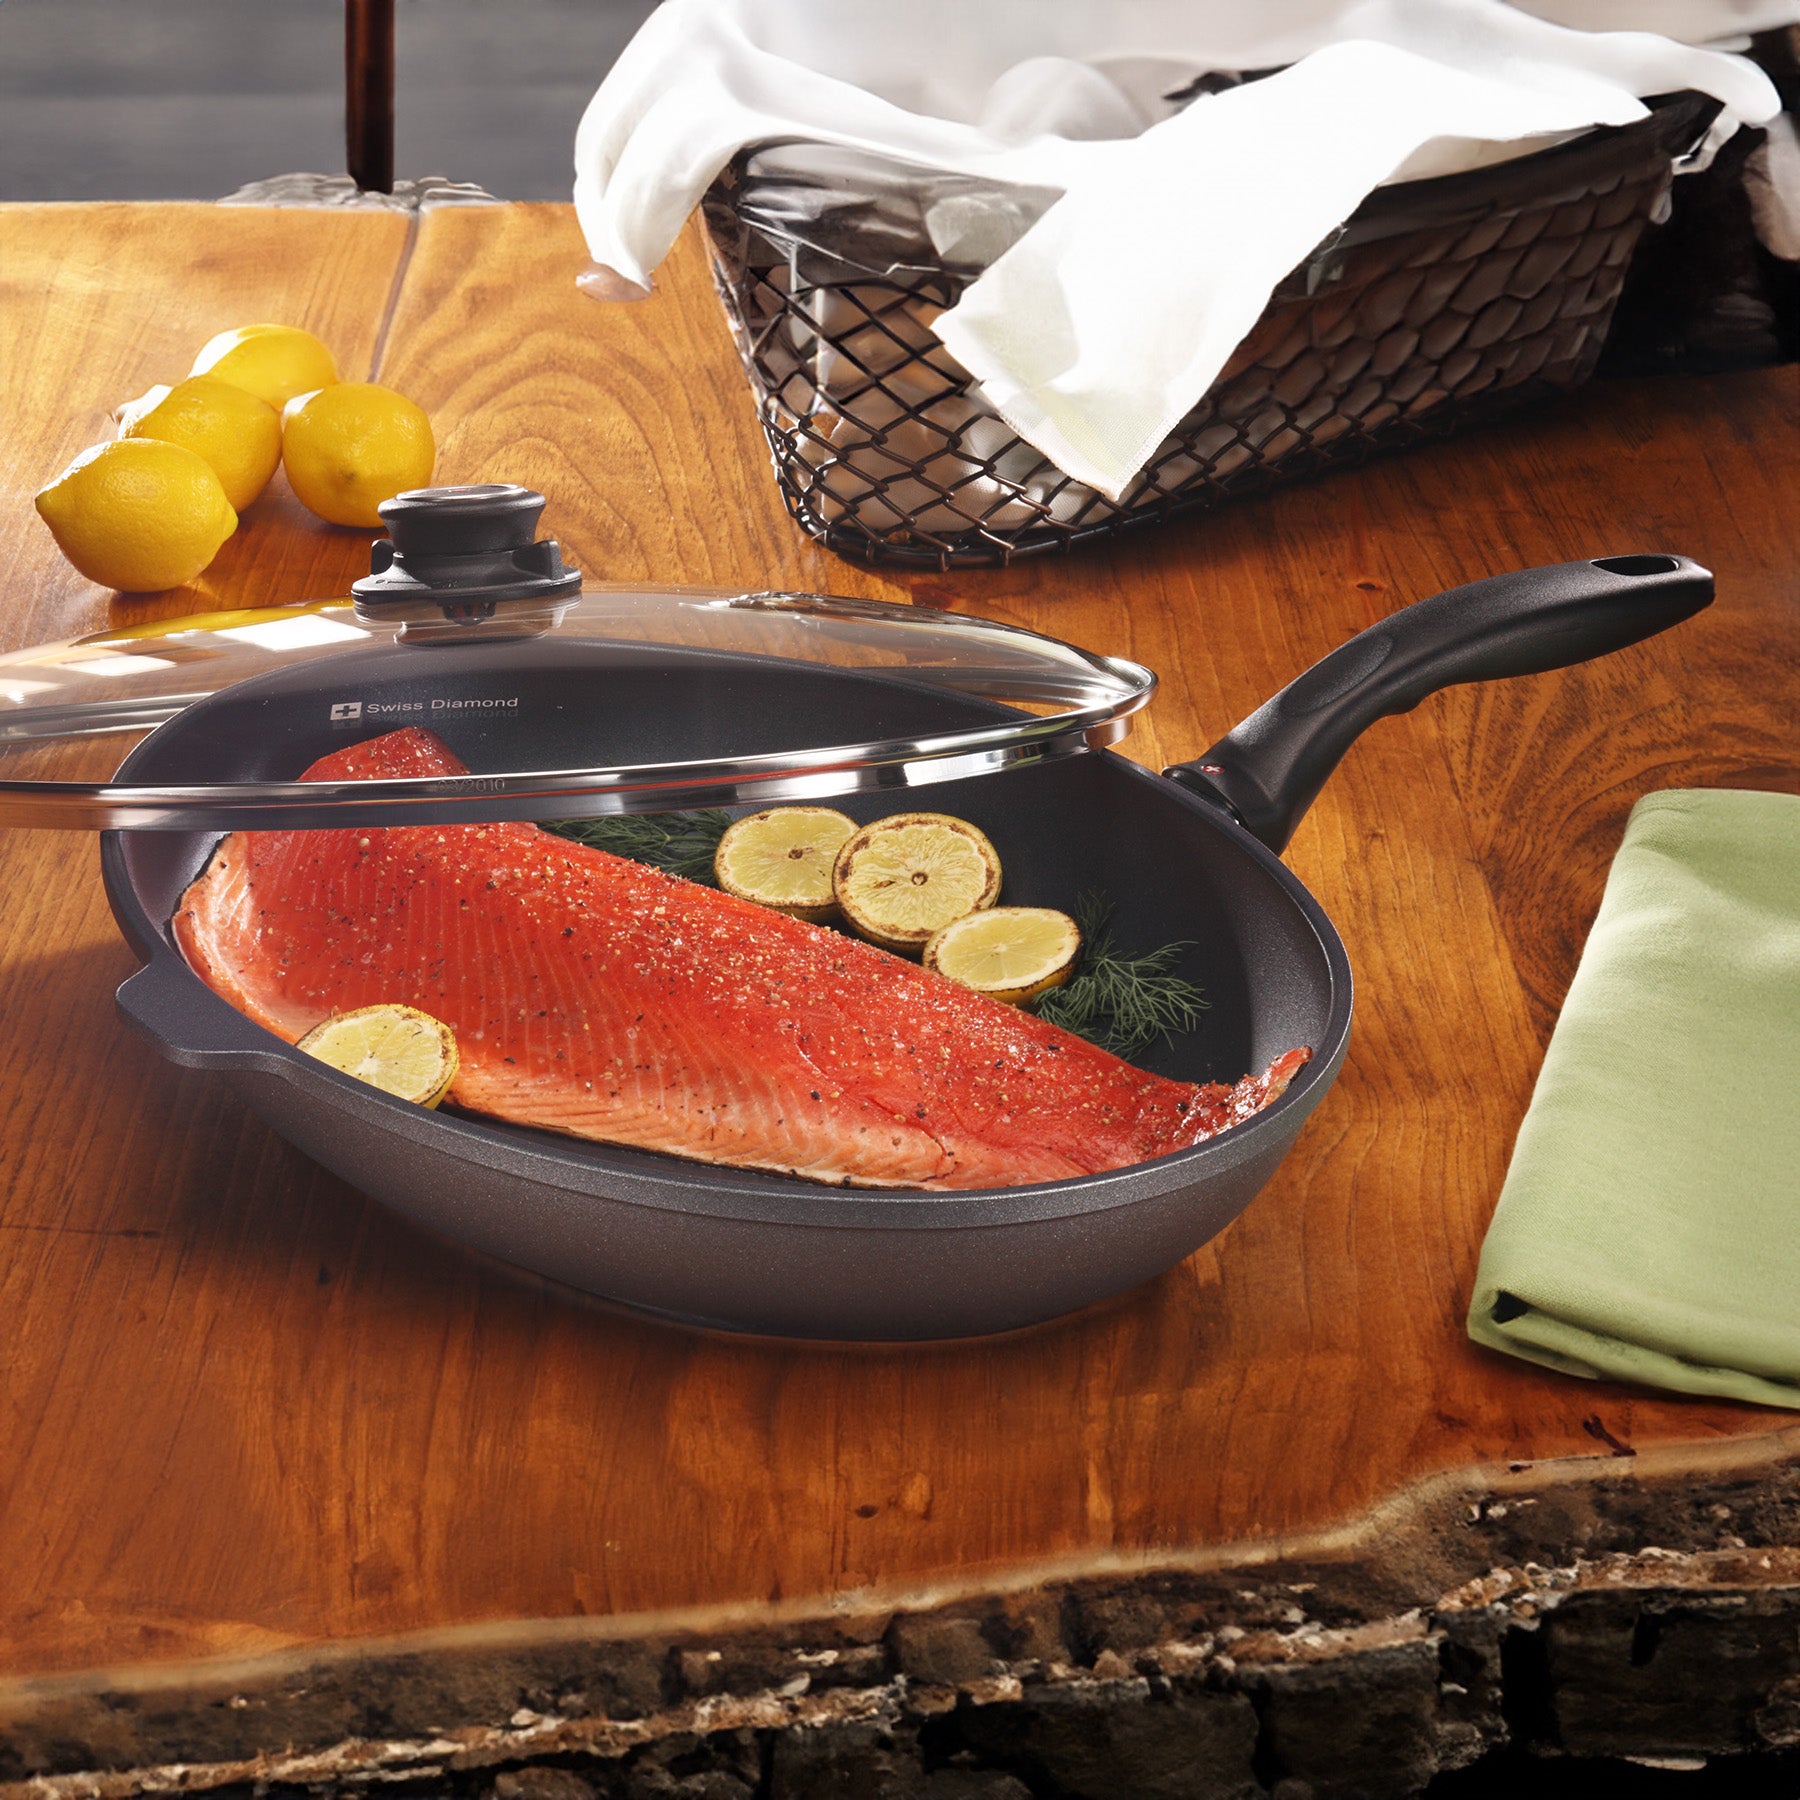 HD Nonstick Oval Fish Pan with Glass Lid in use on wooden table